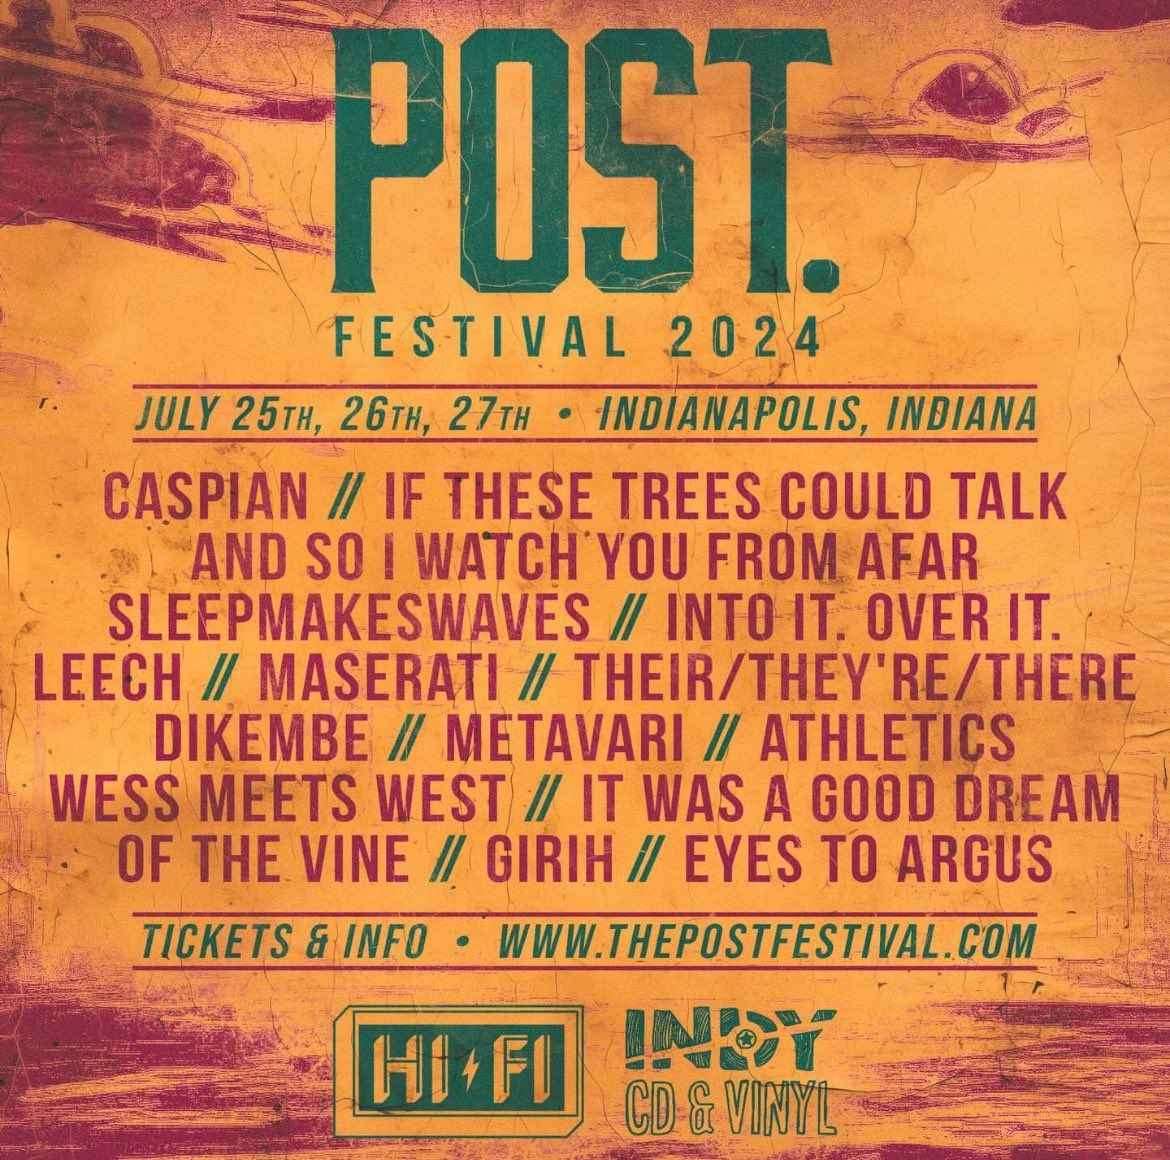 Post. Festival: Caspian  If These Trees Could Talk & And So I Watch You From Afar - Weekend Pass